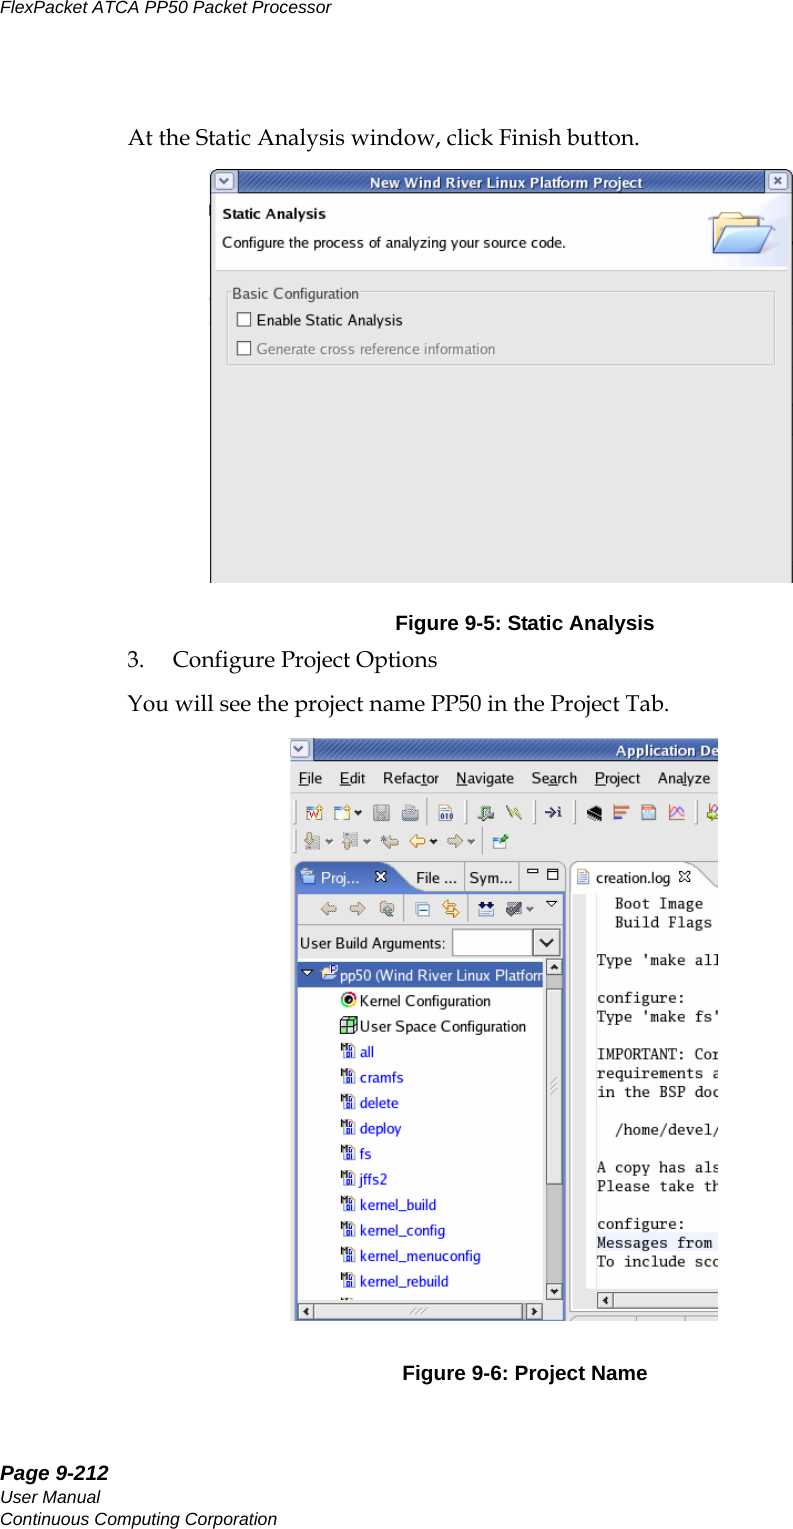 Page 9-212User ManualContinuous Computing CorporationFlexPacket ATCA PP50 Packet Processor     PreliminaryAt the Static Analysis window, click Finish button.Figure 9-5: Static Analysis3. Configure Project OptionsYou will see the project name PP50 in the Project Tab.Figure 9-6: Project Name